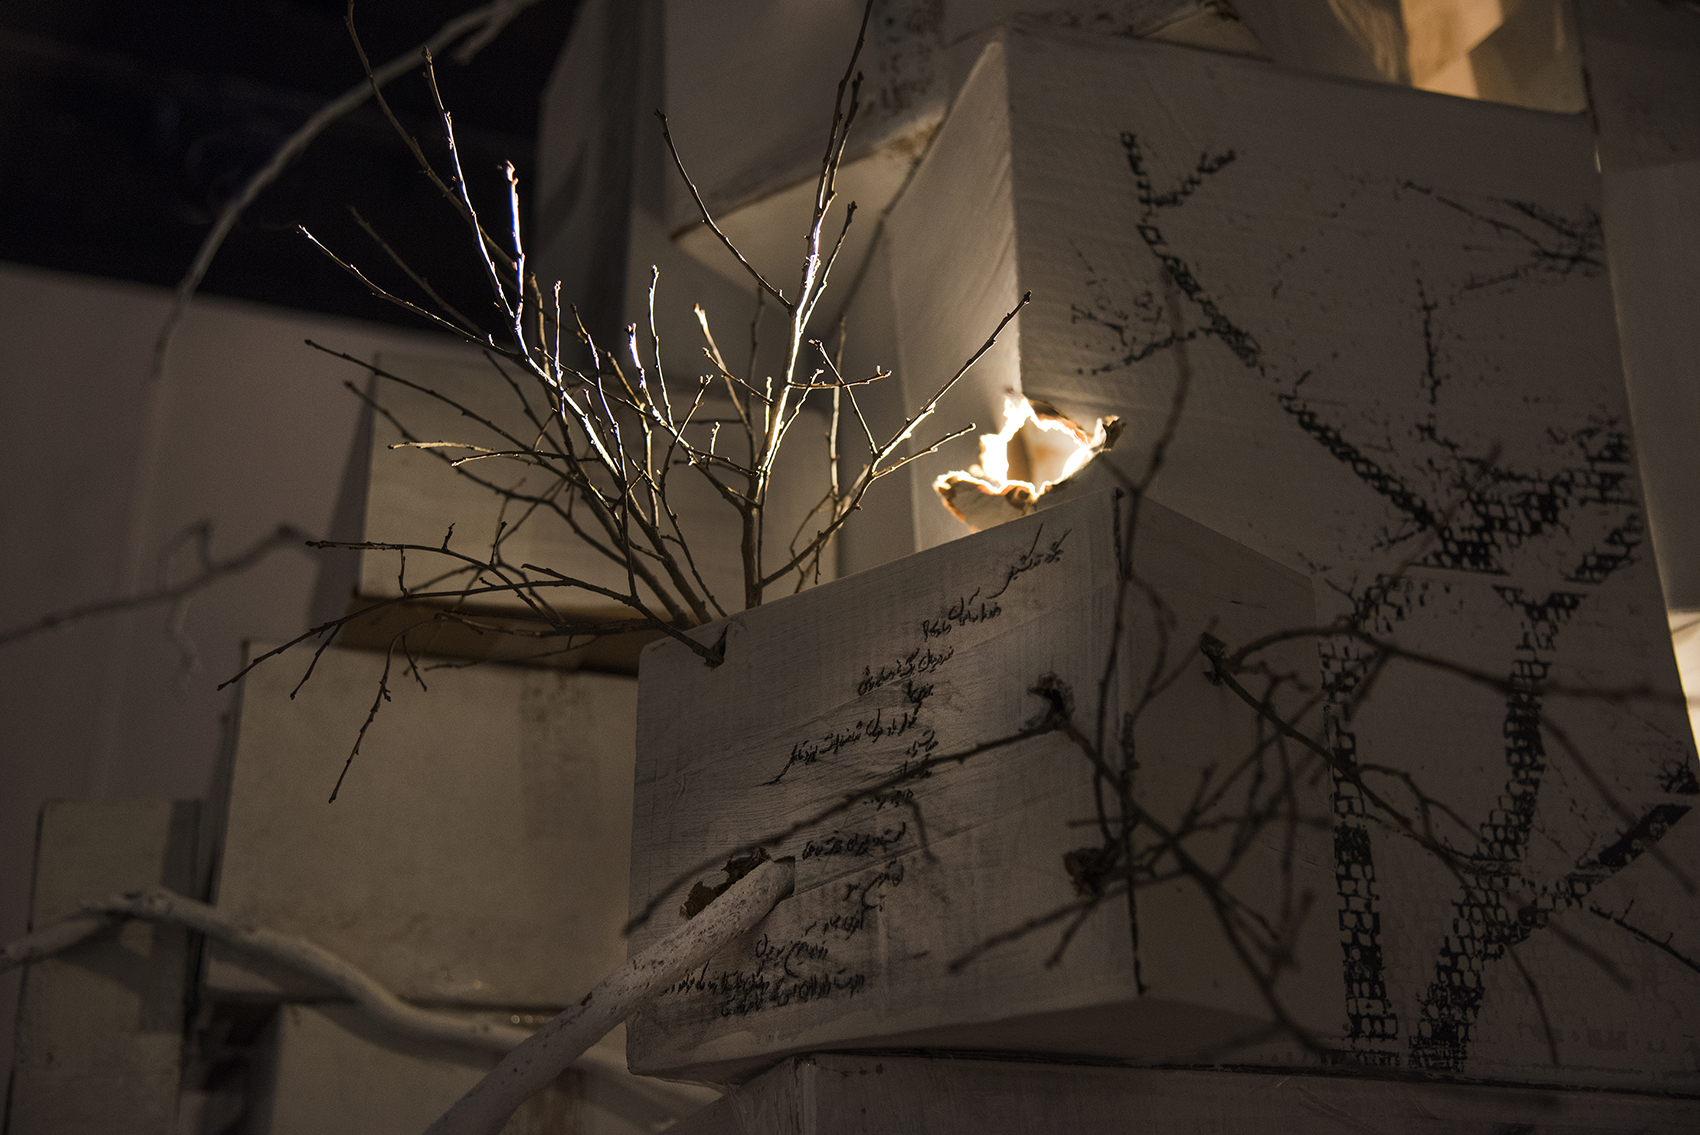 photo of Wispobish art installation featuring tree branches and white-washed cardboard boxes